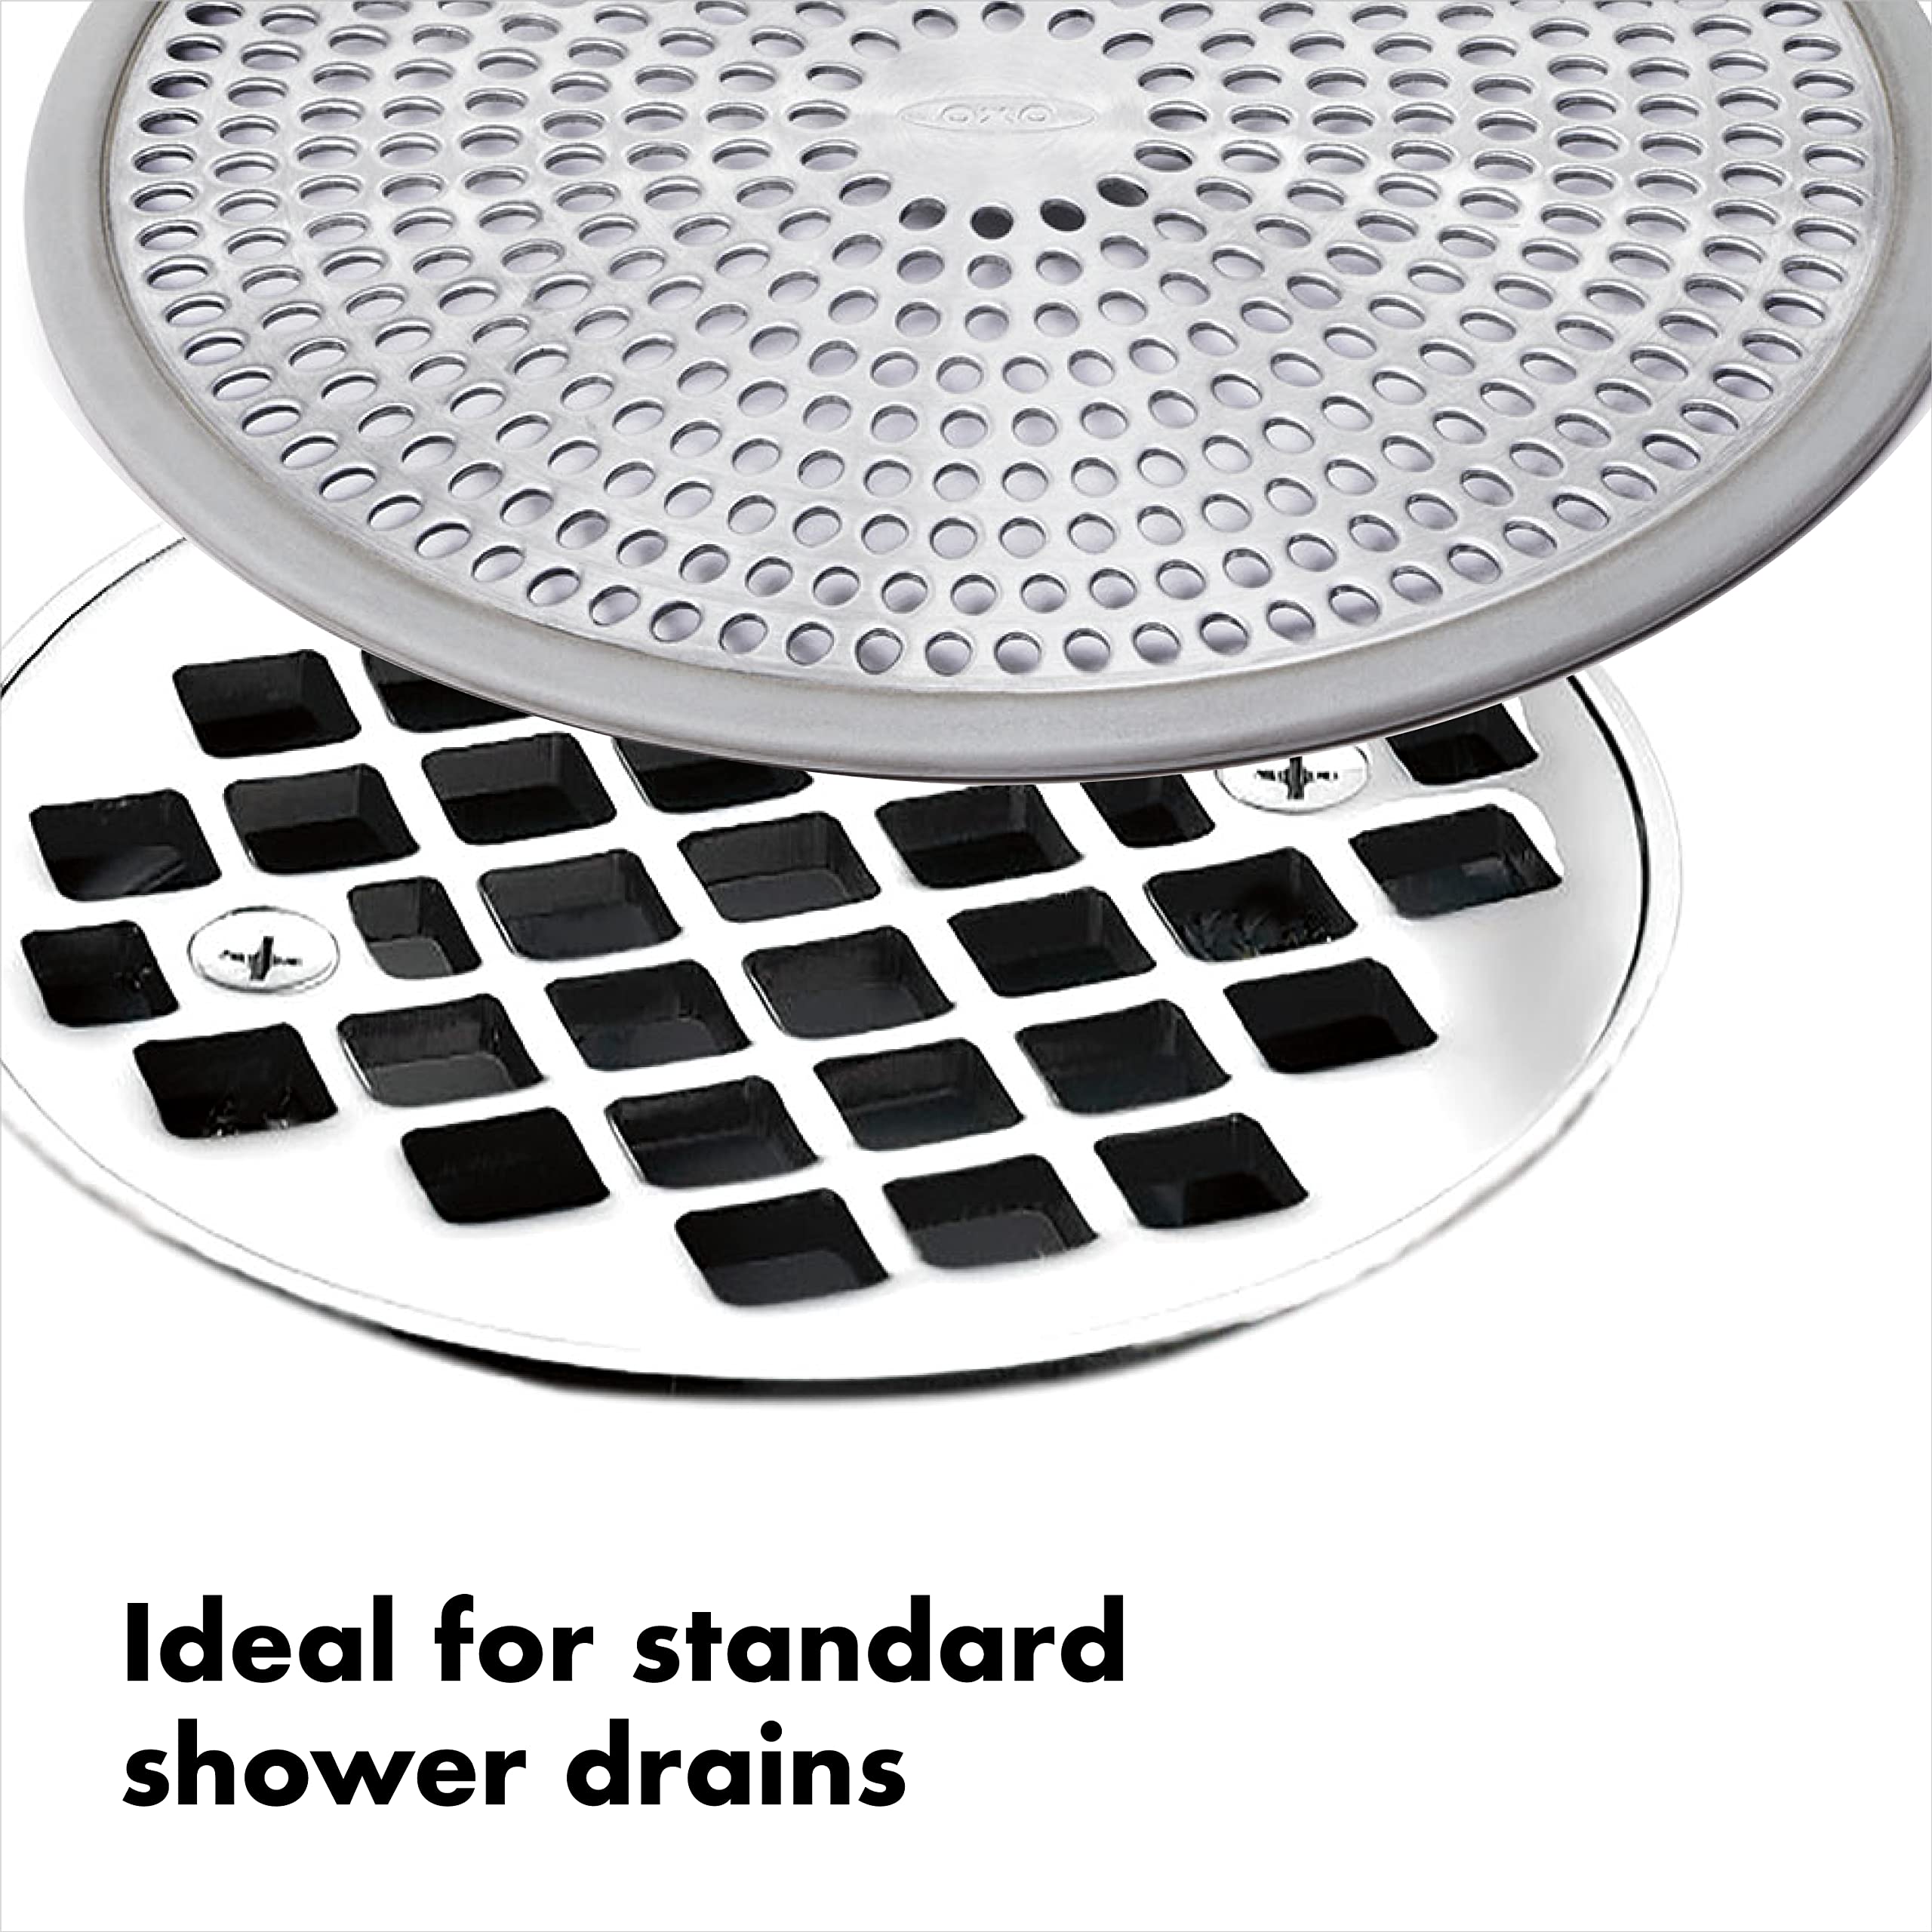 OXO Good Grips Large Sink Mat & Good Grips Shower Stall Drain Protector, Stainless